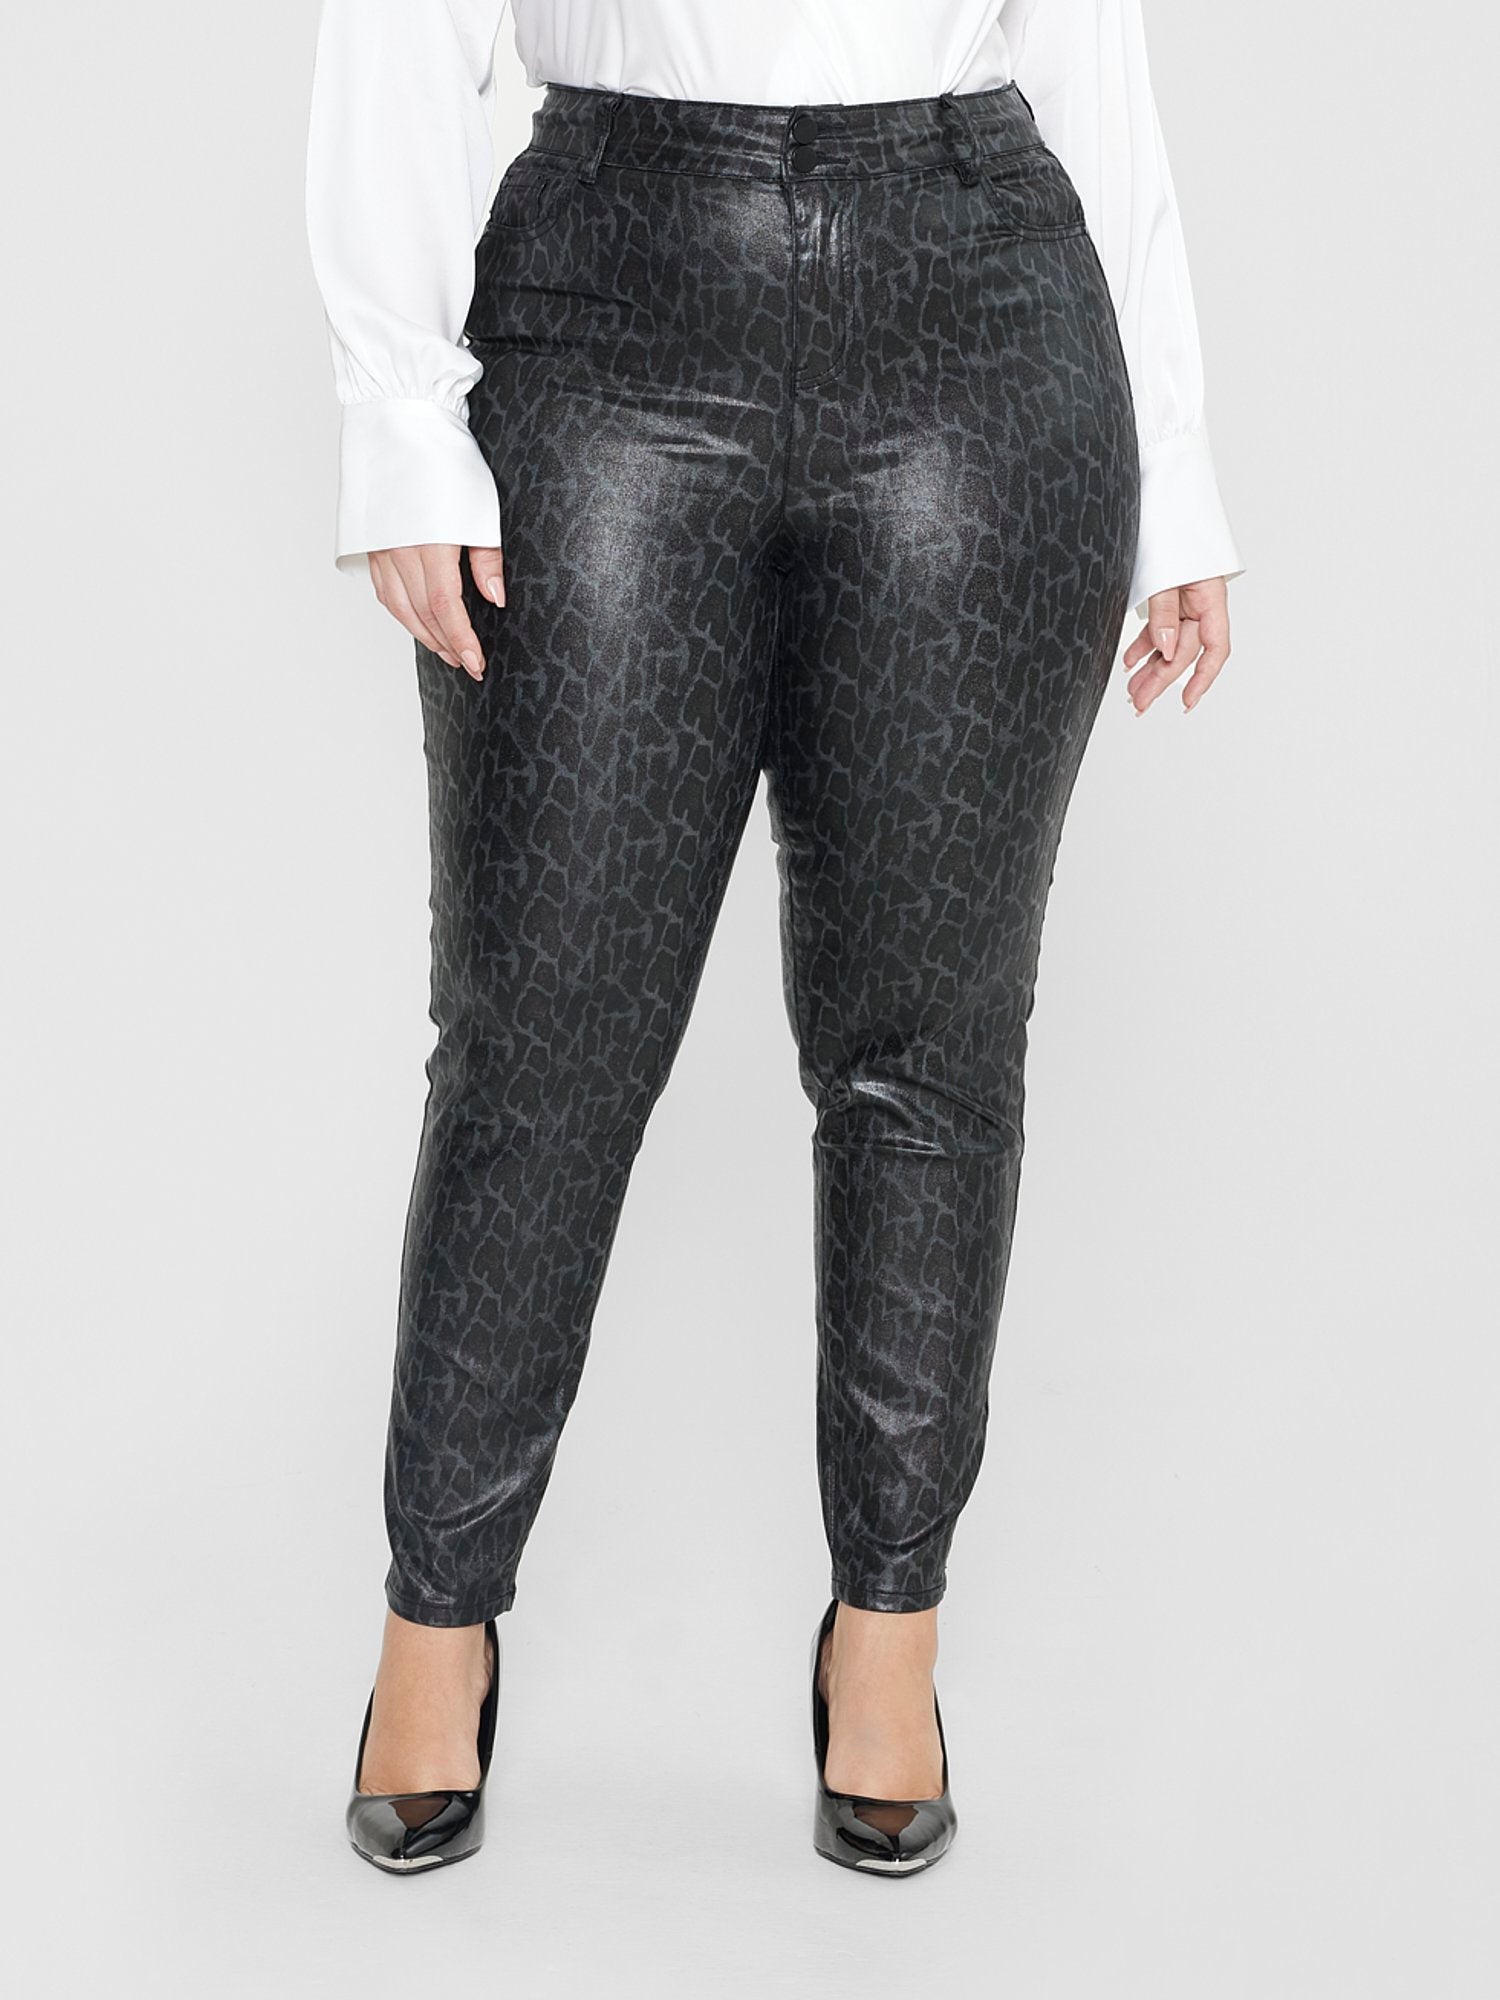 Fashion and Style Leather Pants Trending now Available at our shop in  different sizes Price::35,000 0754509925, 0676530531